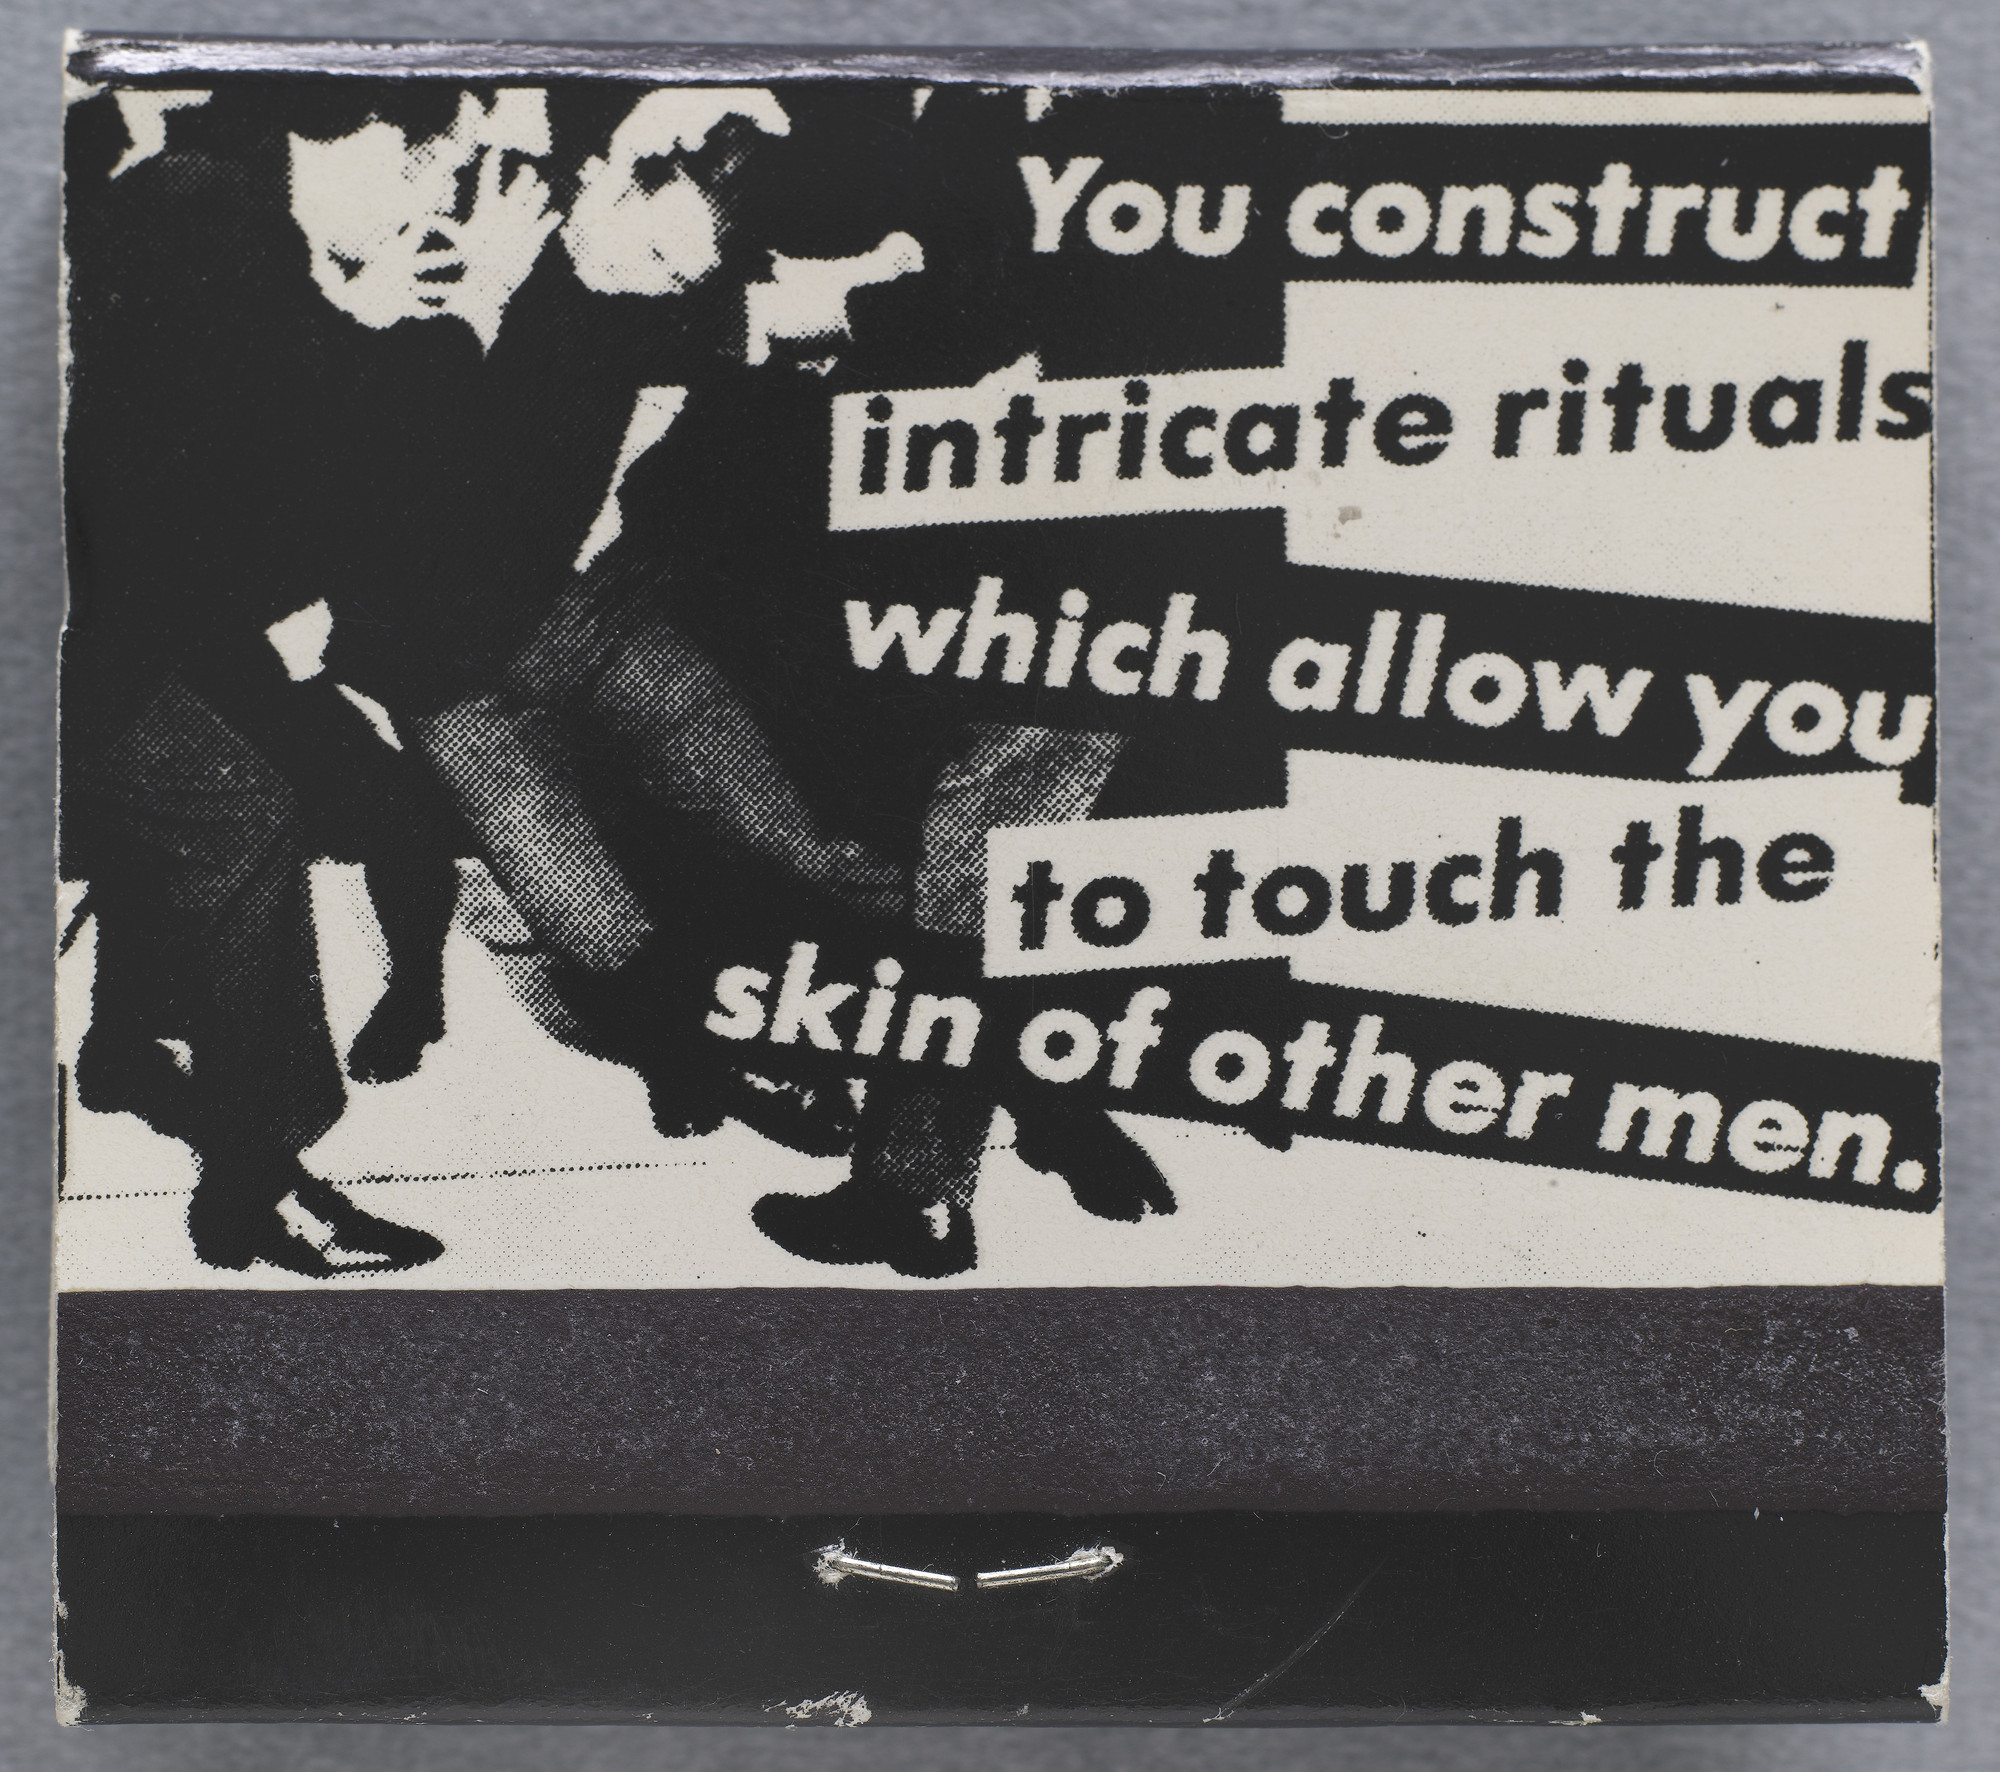 Barbara Kruger. Untitled (You consrtuct intricate rituals which allow you to touch the skin of other men) 1986. Source: MoMA